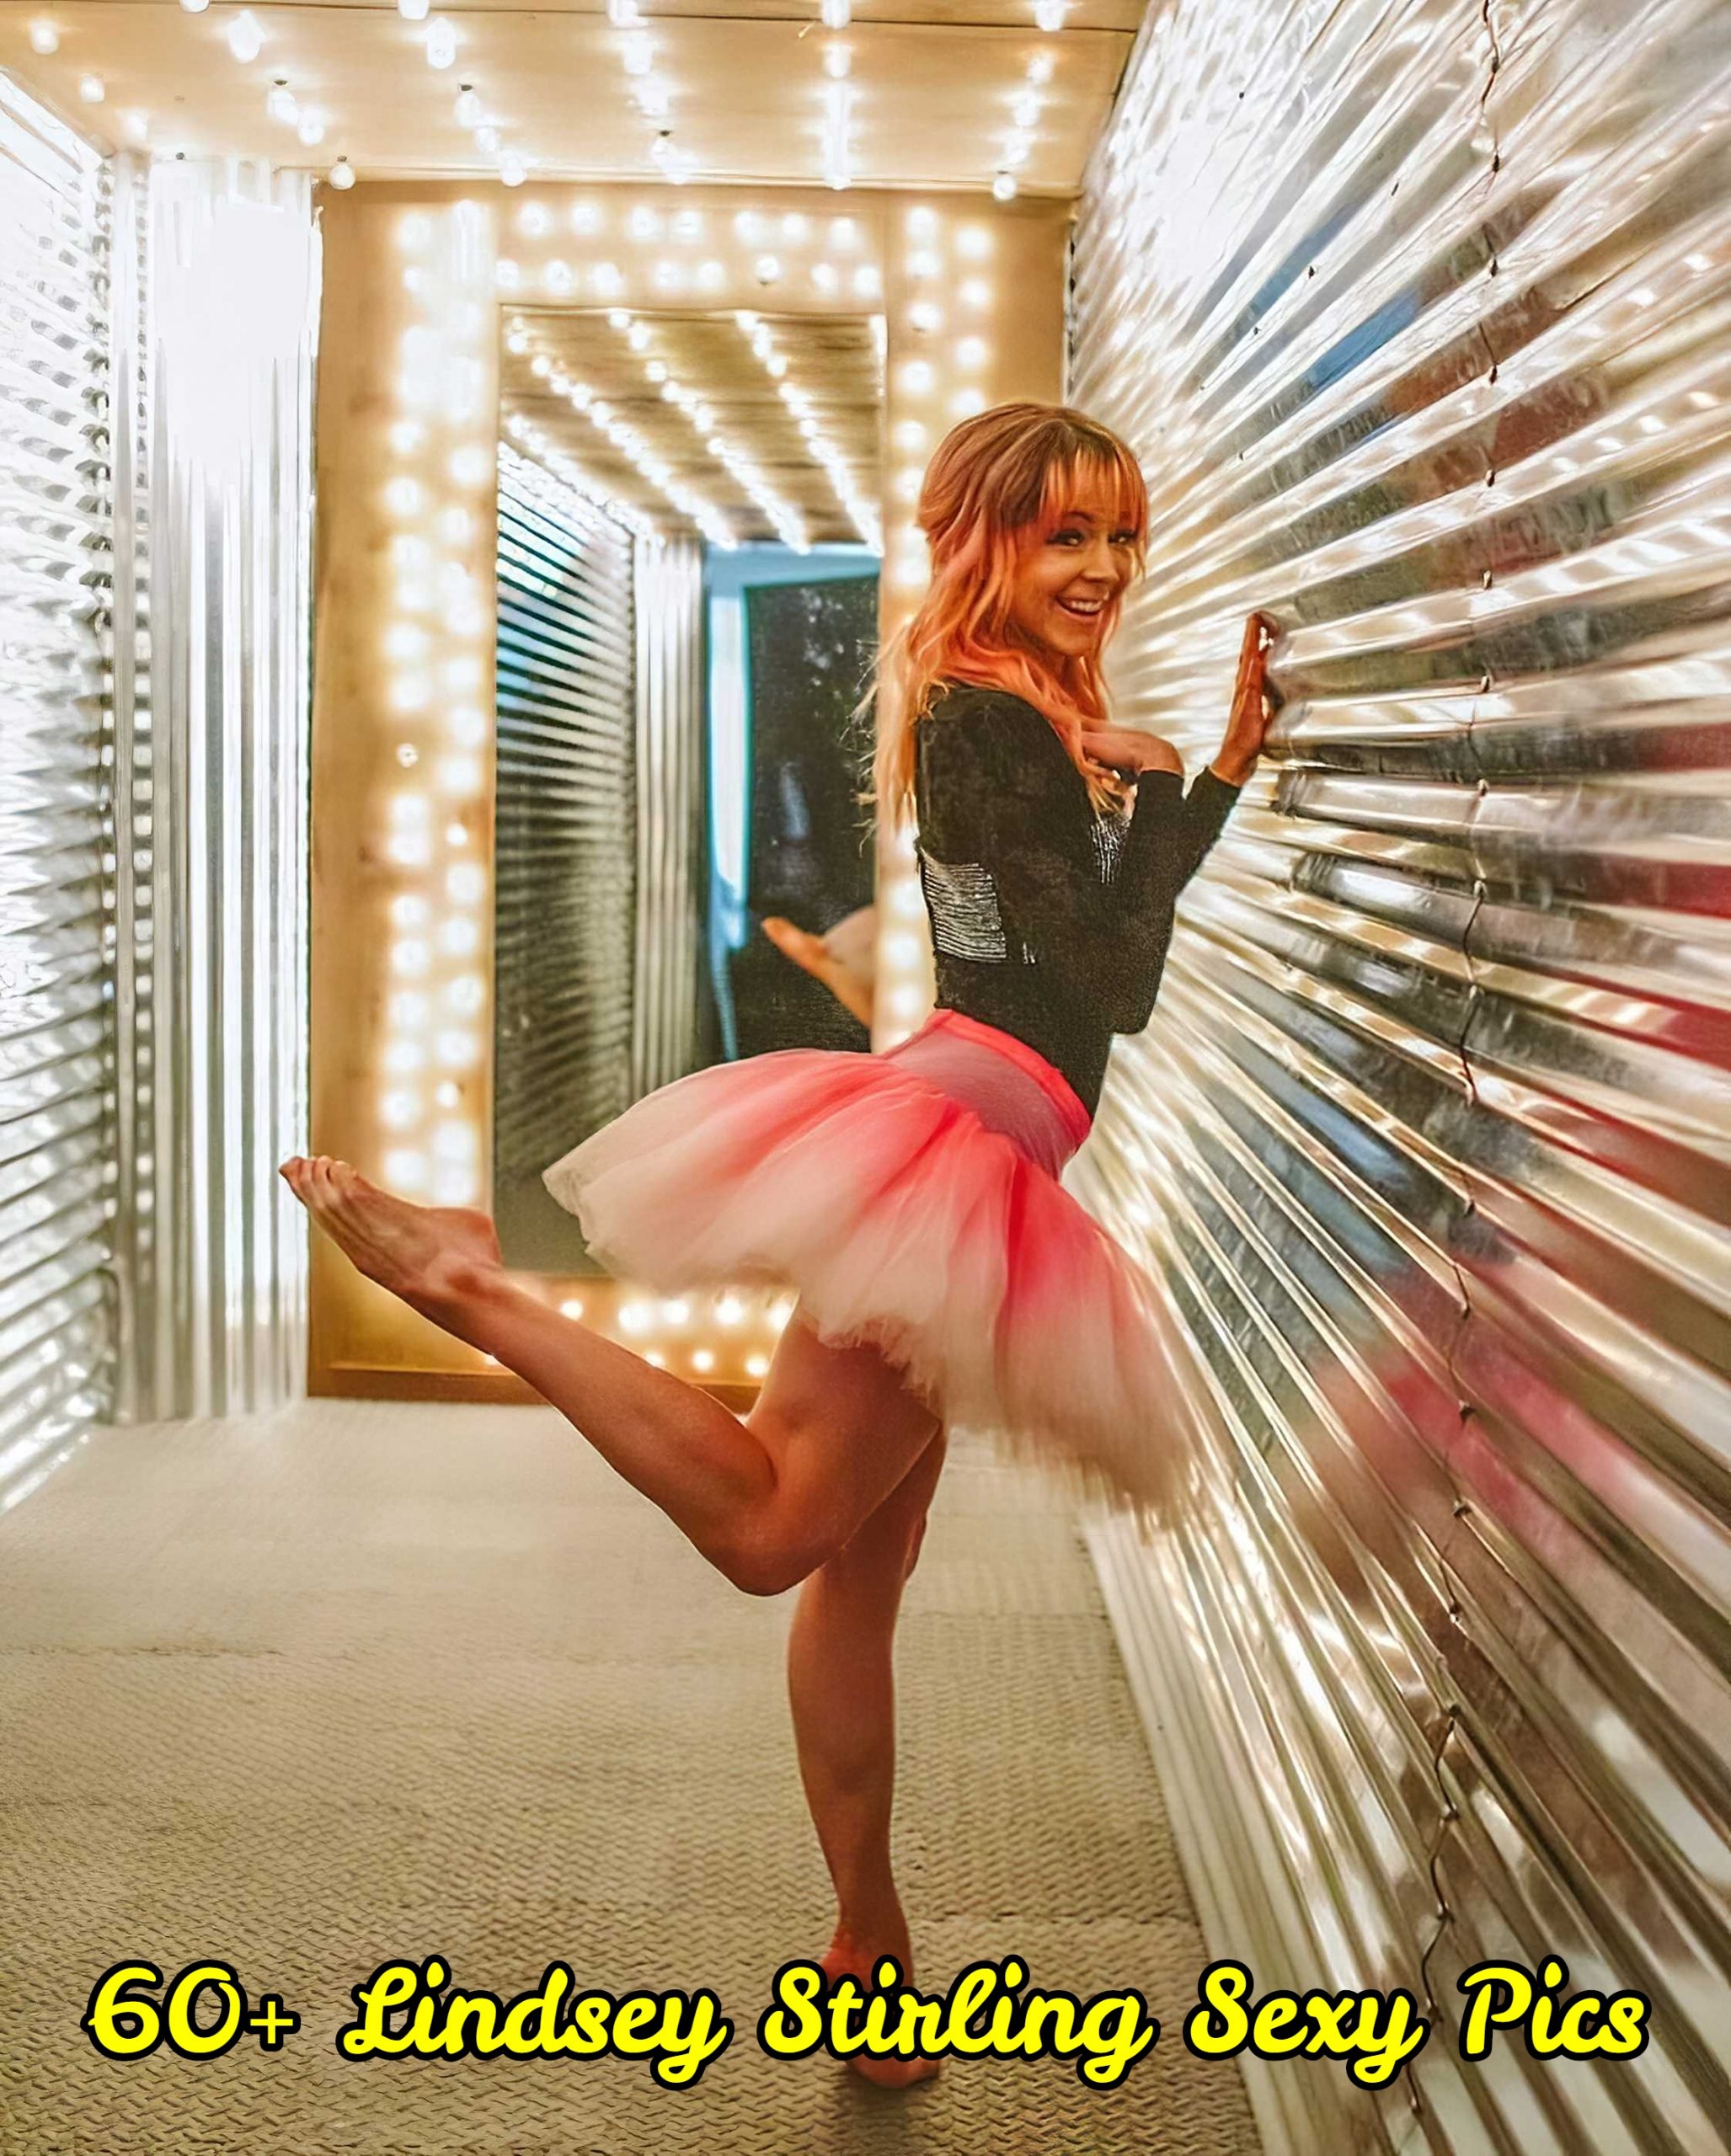 Lindsay Stirling Sexy photo 26